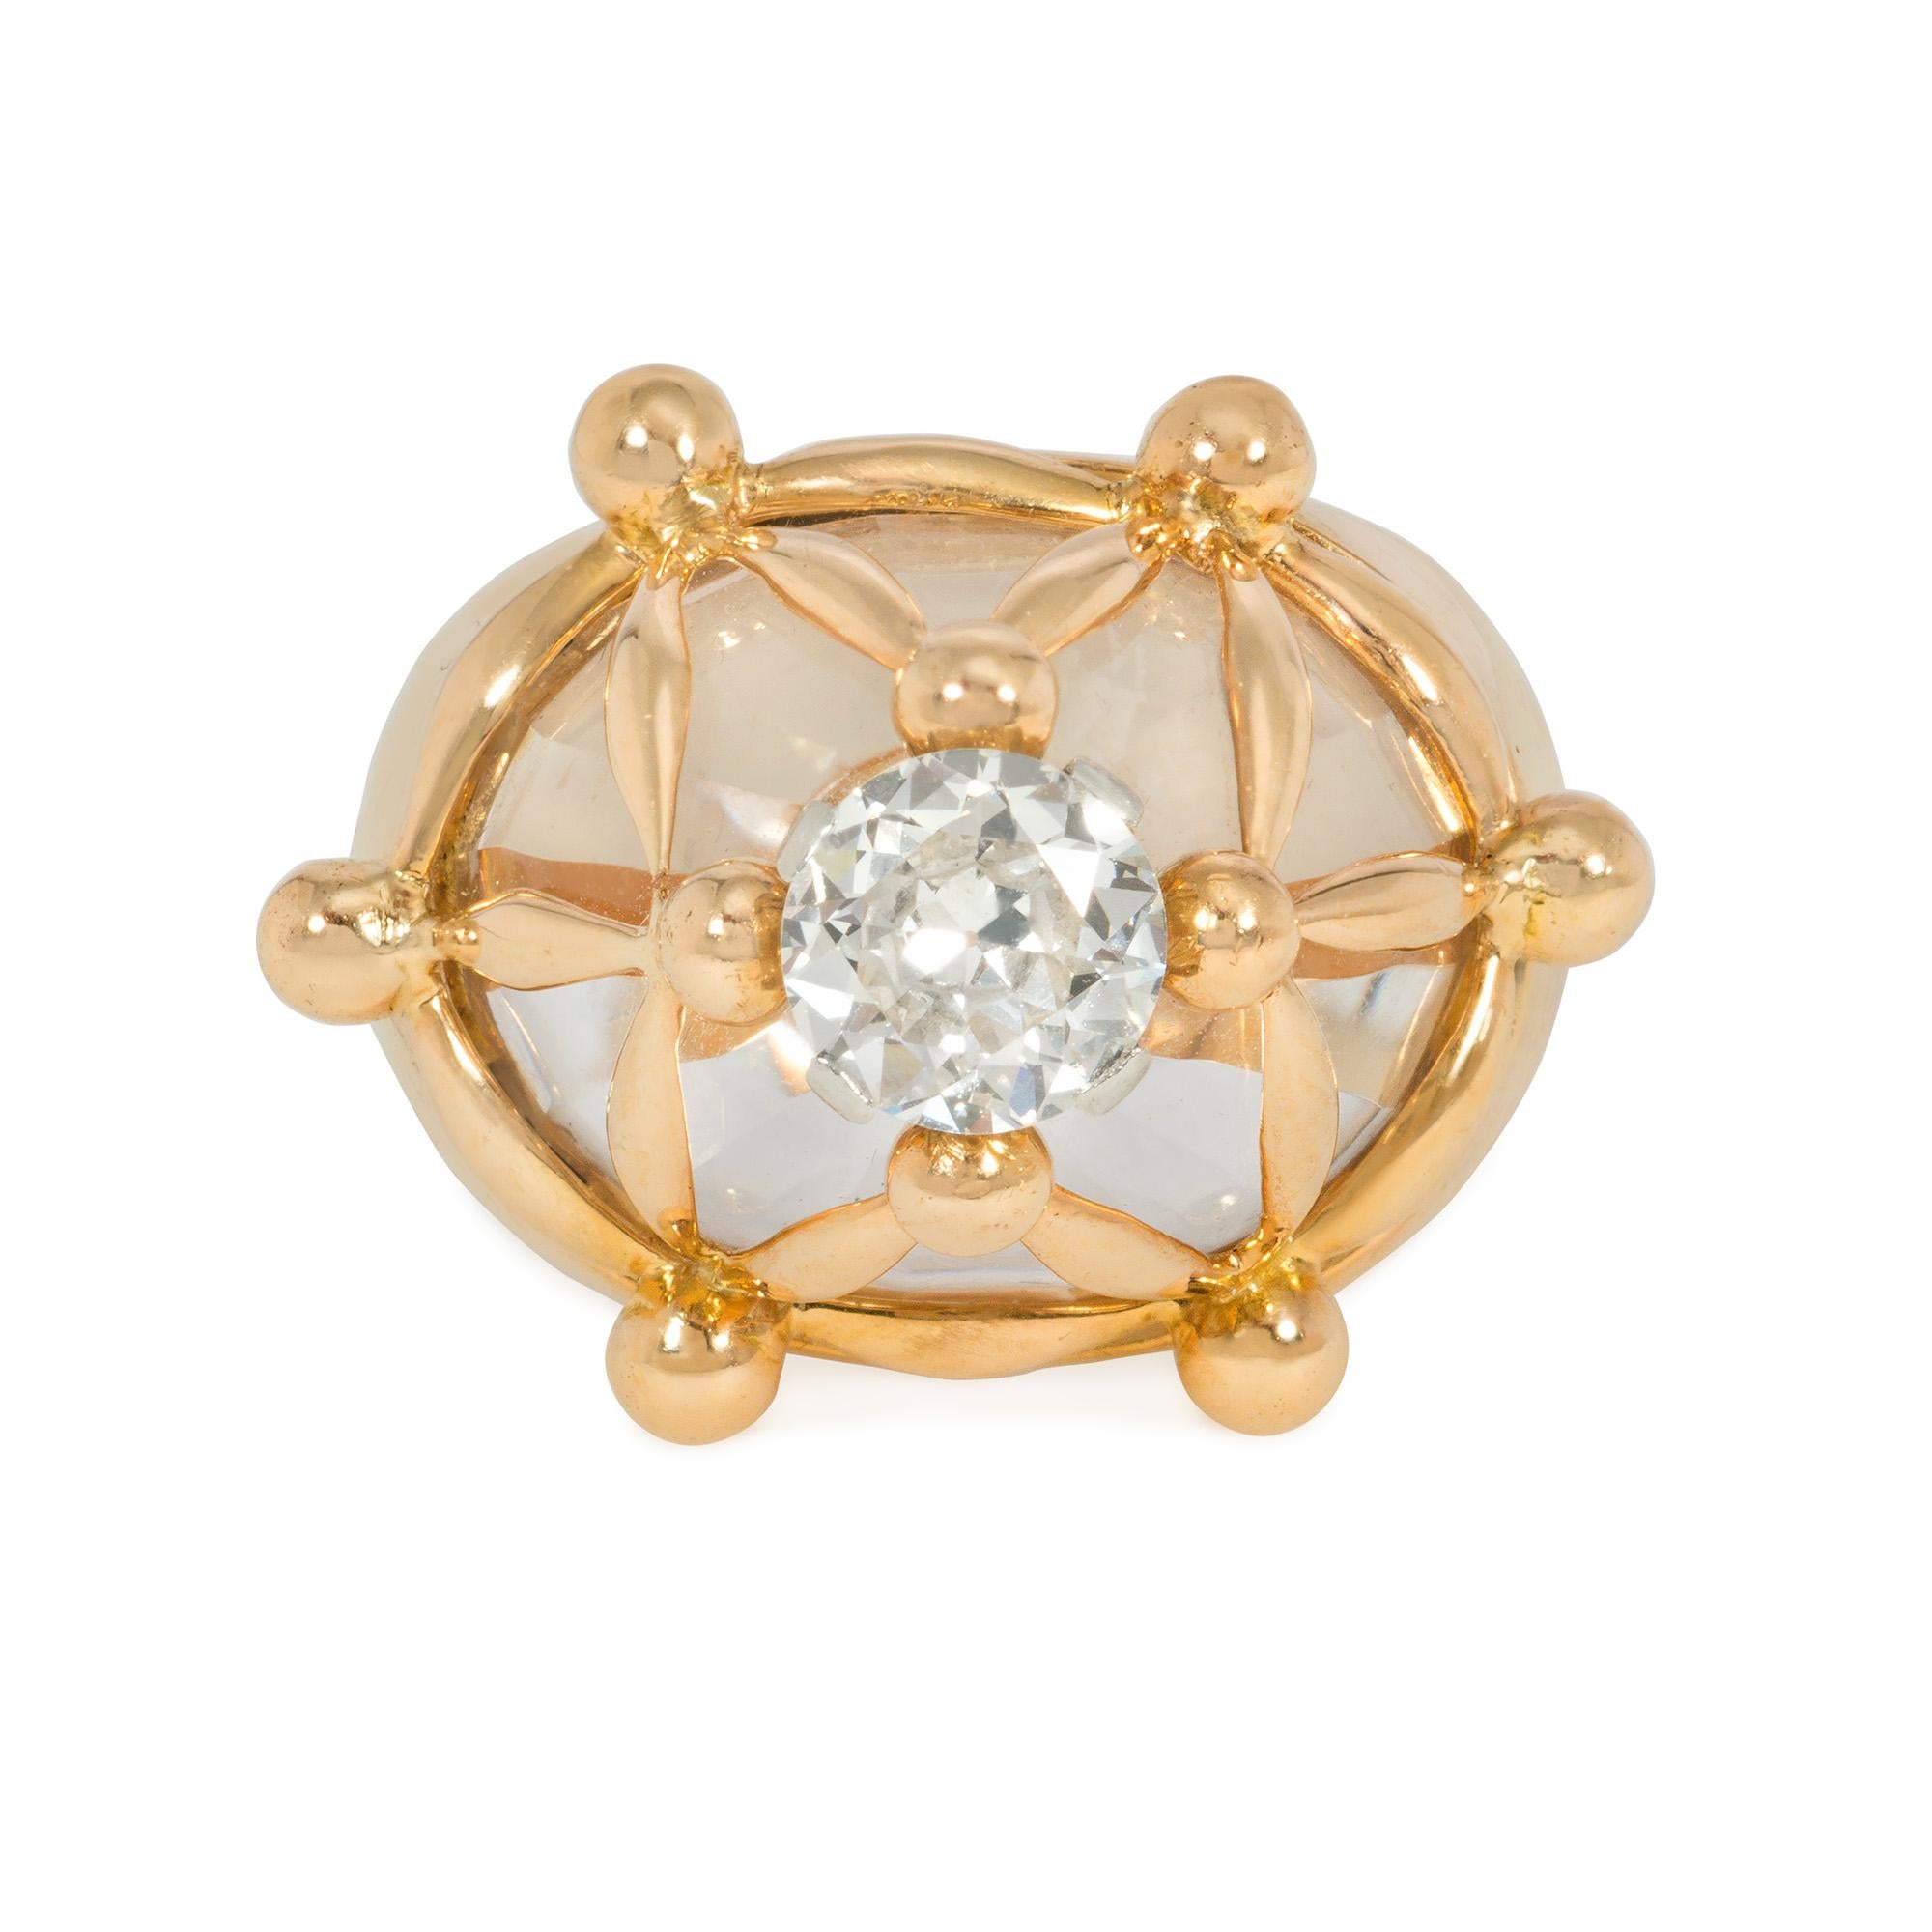 A Mid-Century bombé gold, rock crystal, and diamond ring, the carved rock crystal body centered by a prong-set, brilliant-cut diamond in an extruded gold matrix with bulbous ends, in 18k and platinum. Atw diamond 1.06 cts. France. Poinçon for